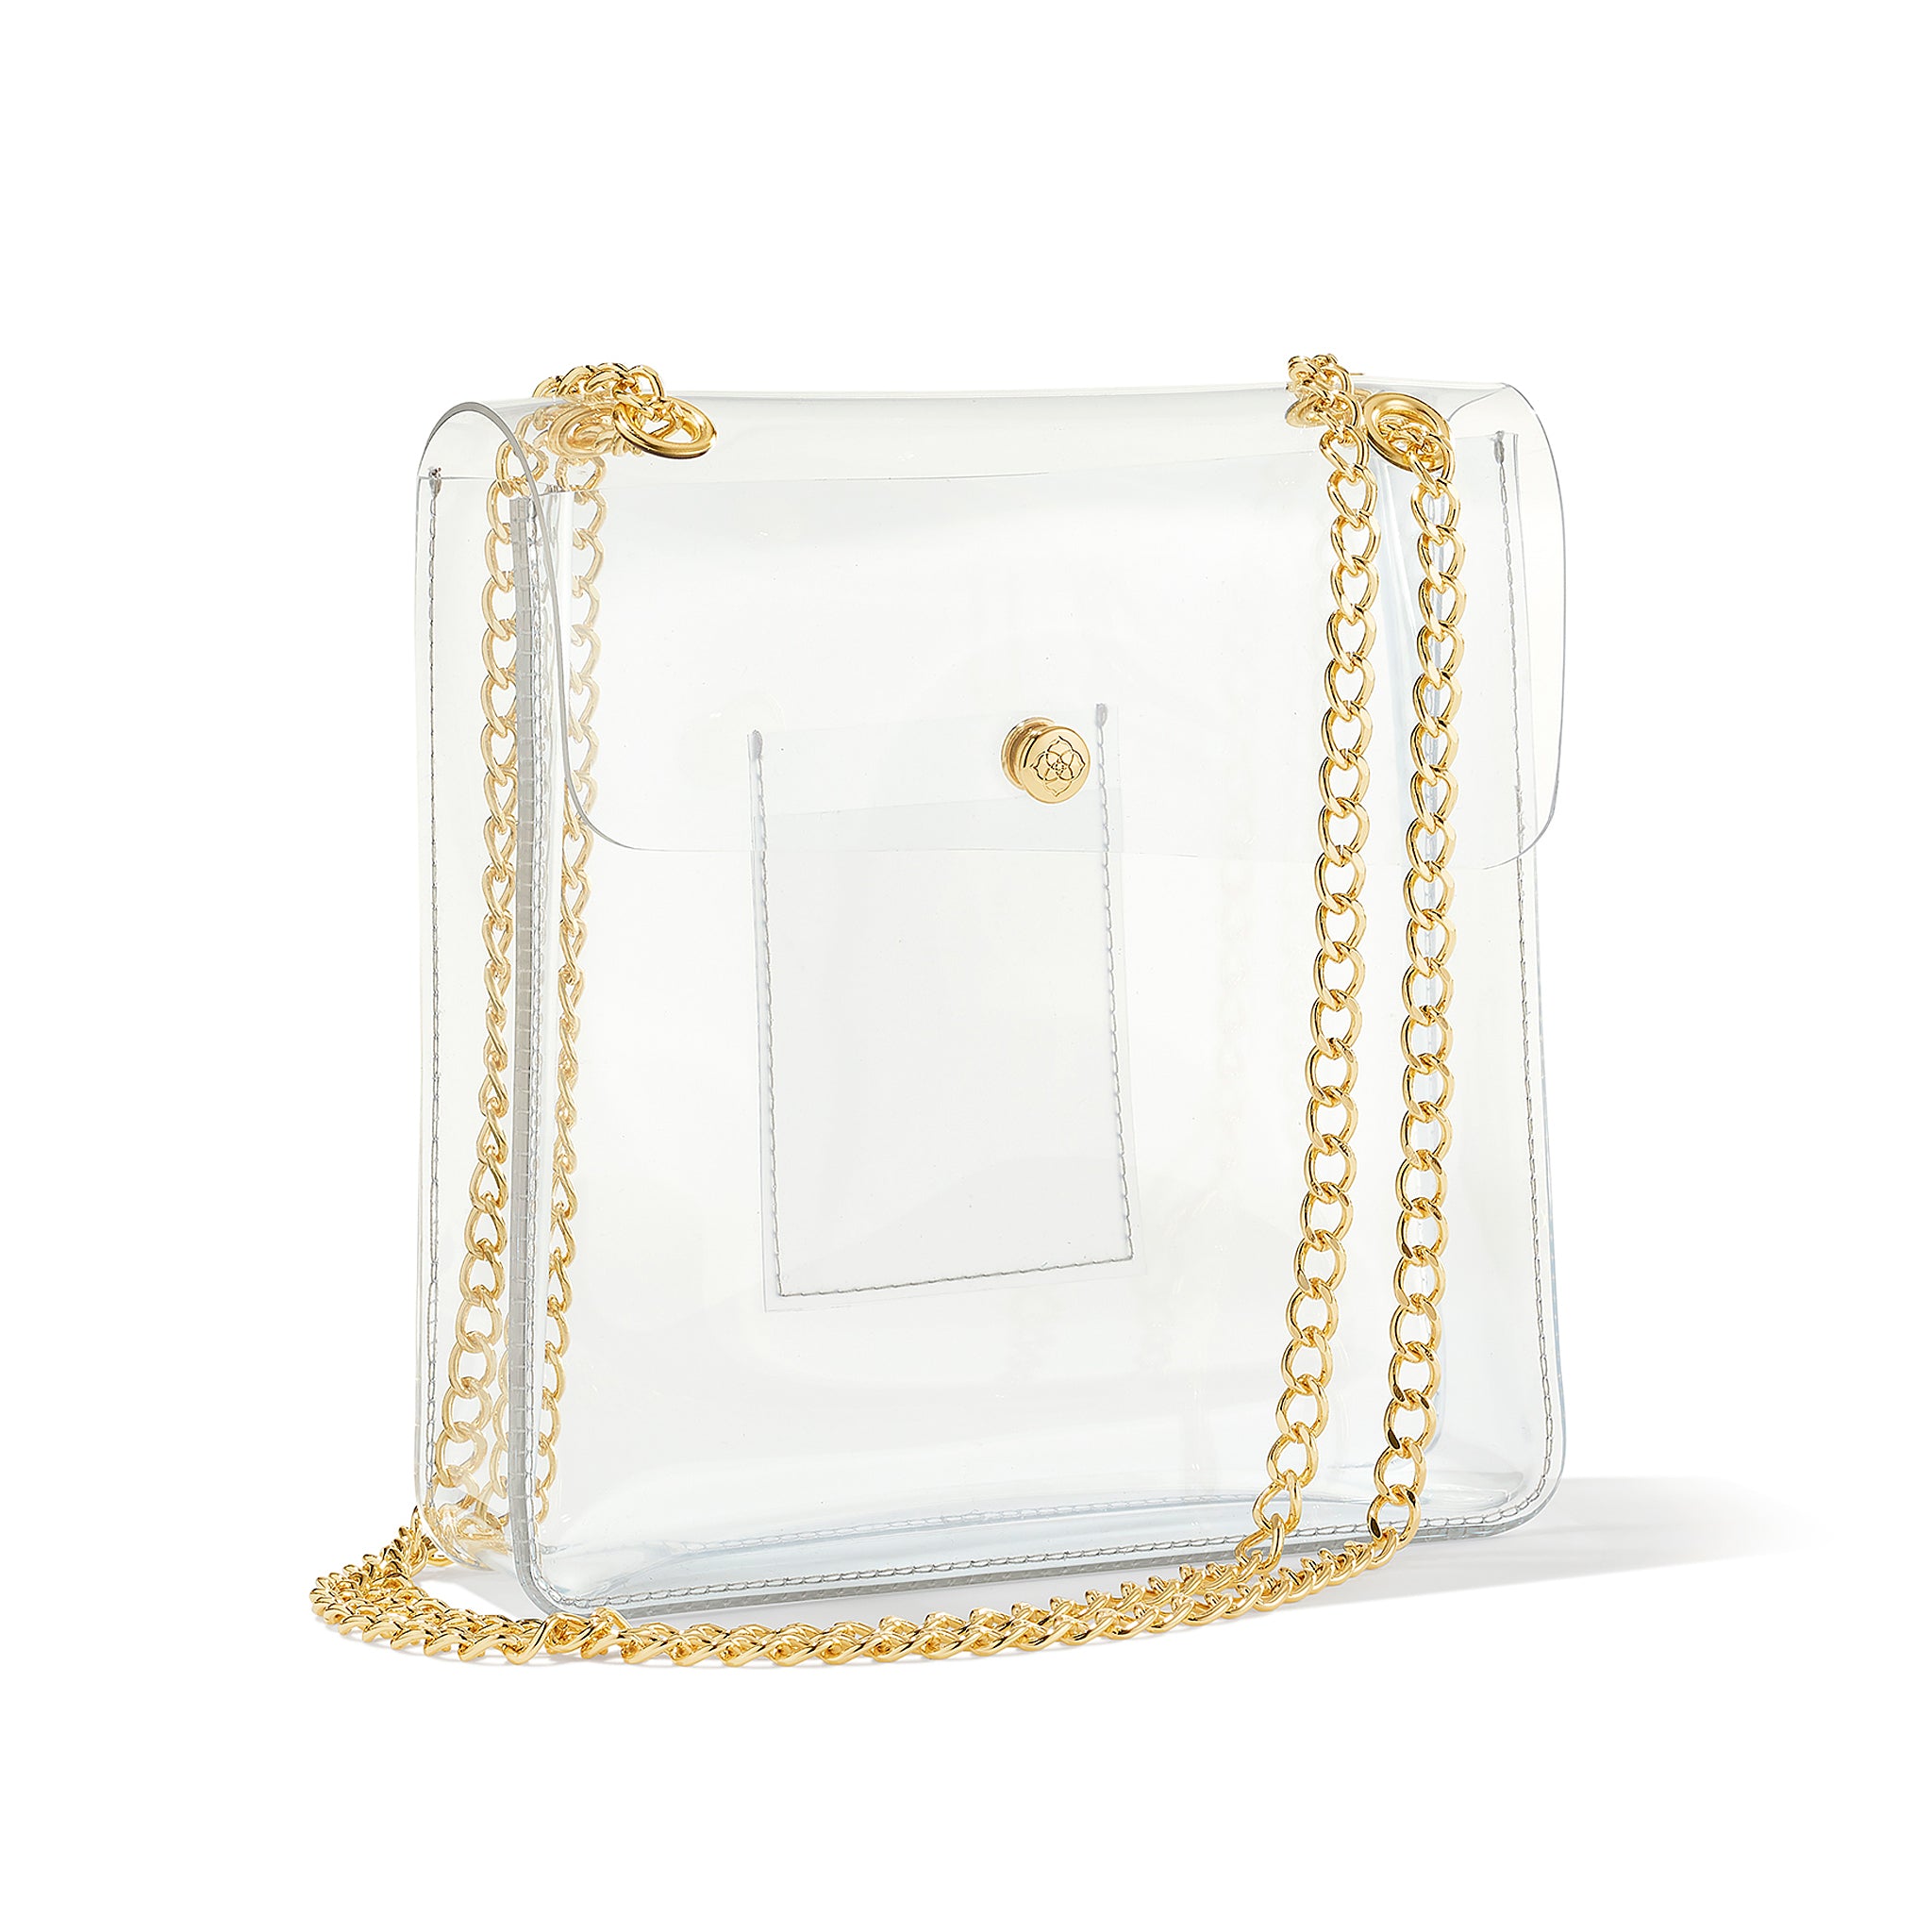 Kendra Scott Medium Clear Cross Body Purse with Gold Chain and Accents